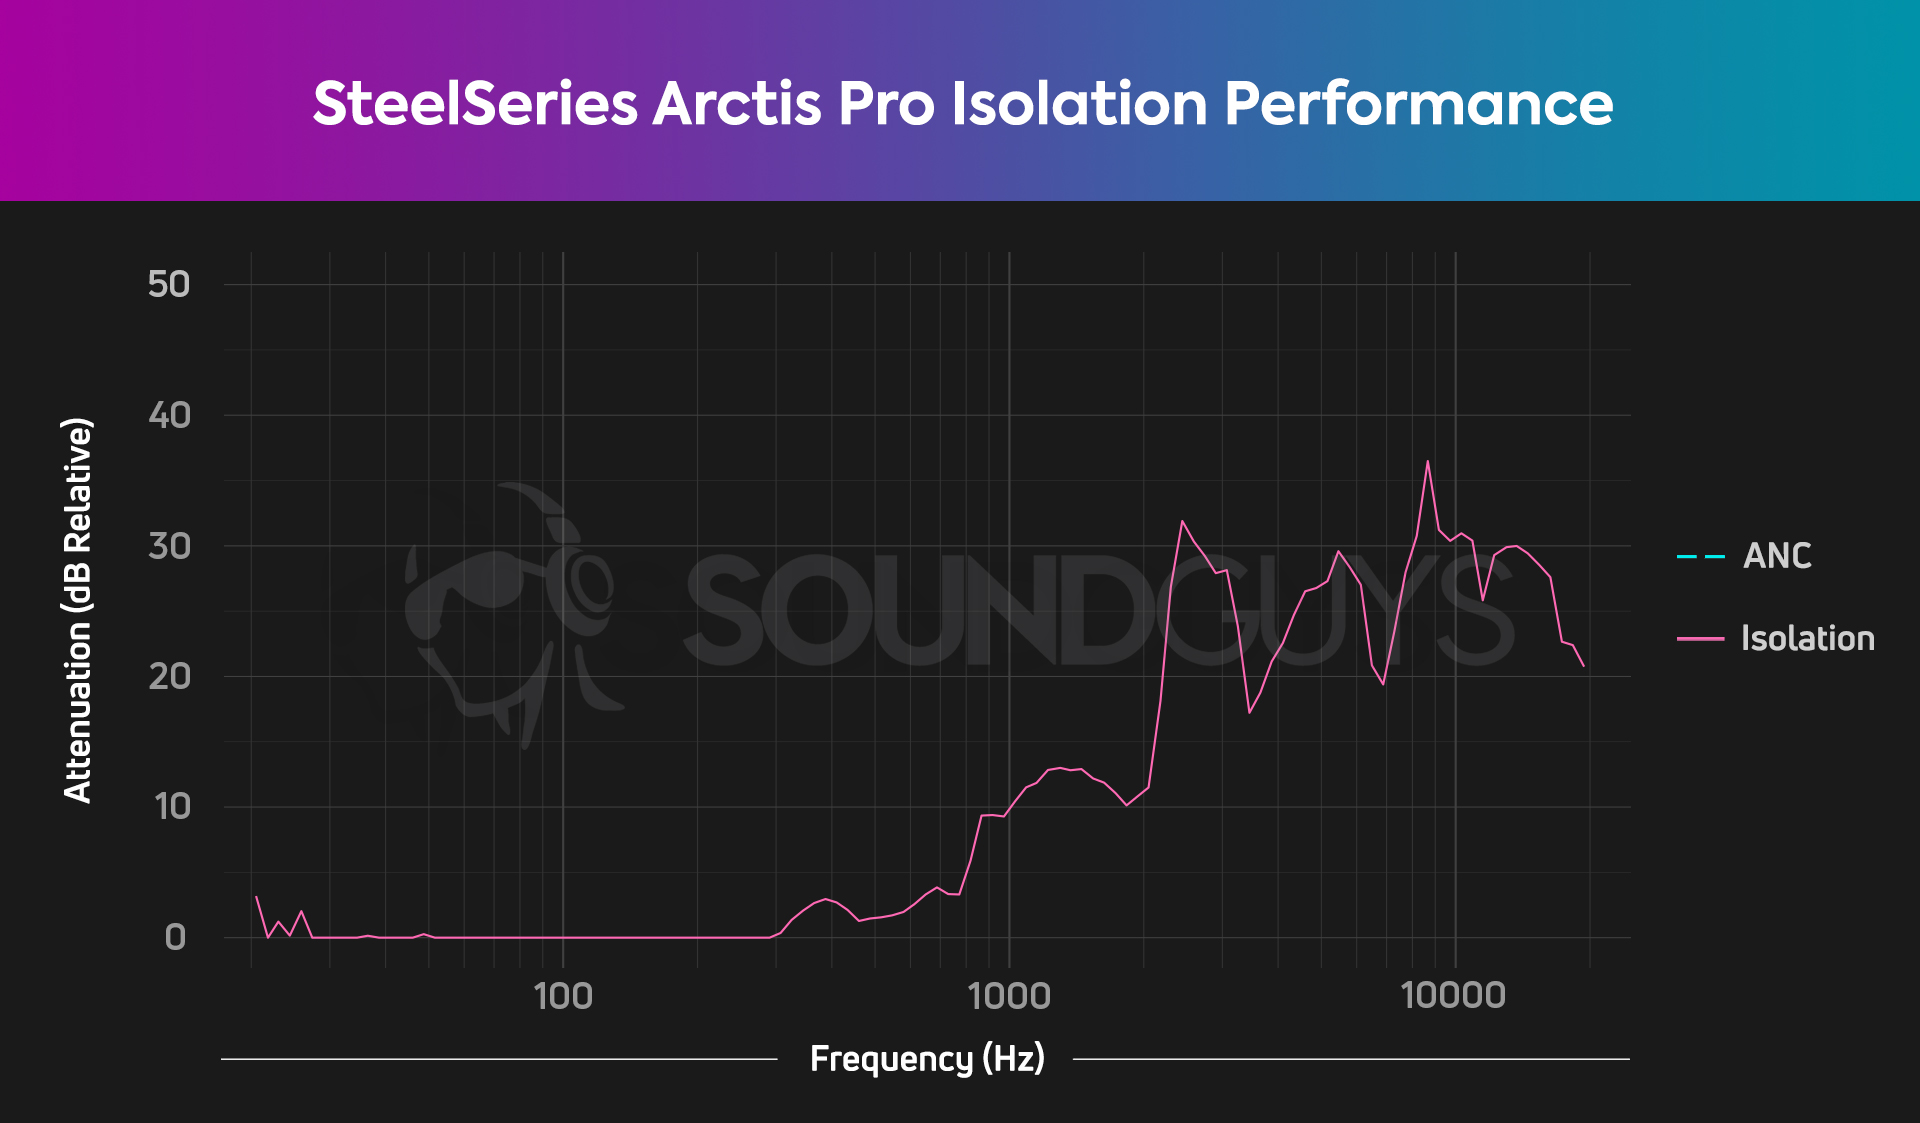 An isolation chart for the SteelSeries Arctis Pro, which shows below average isolation performance